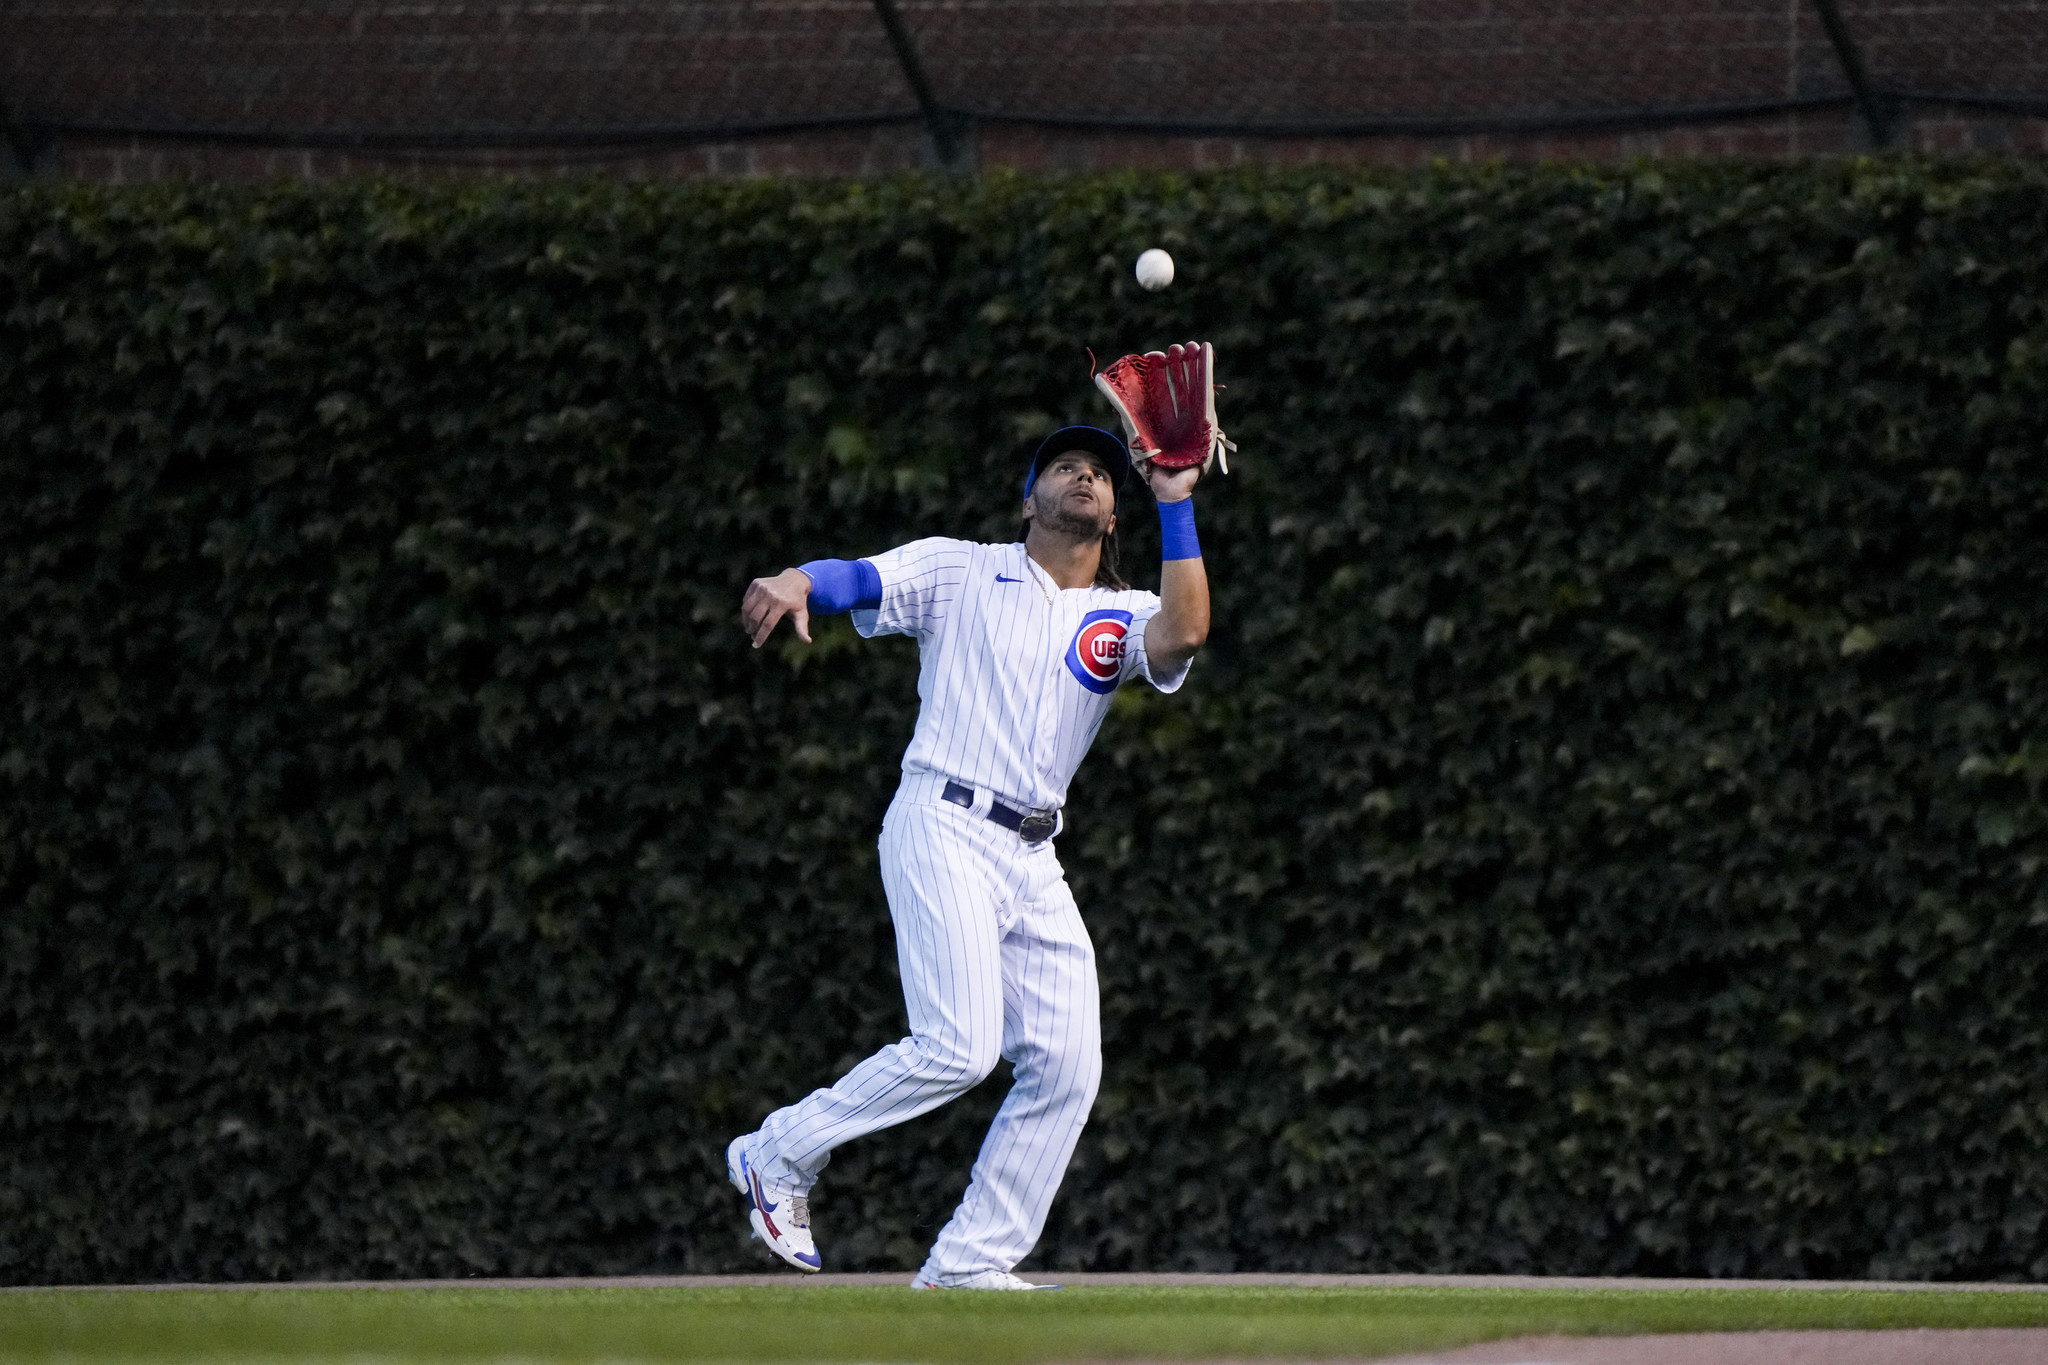 Chicago Cubs get outhit 14-3 as their win streak ends at 5